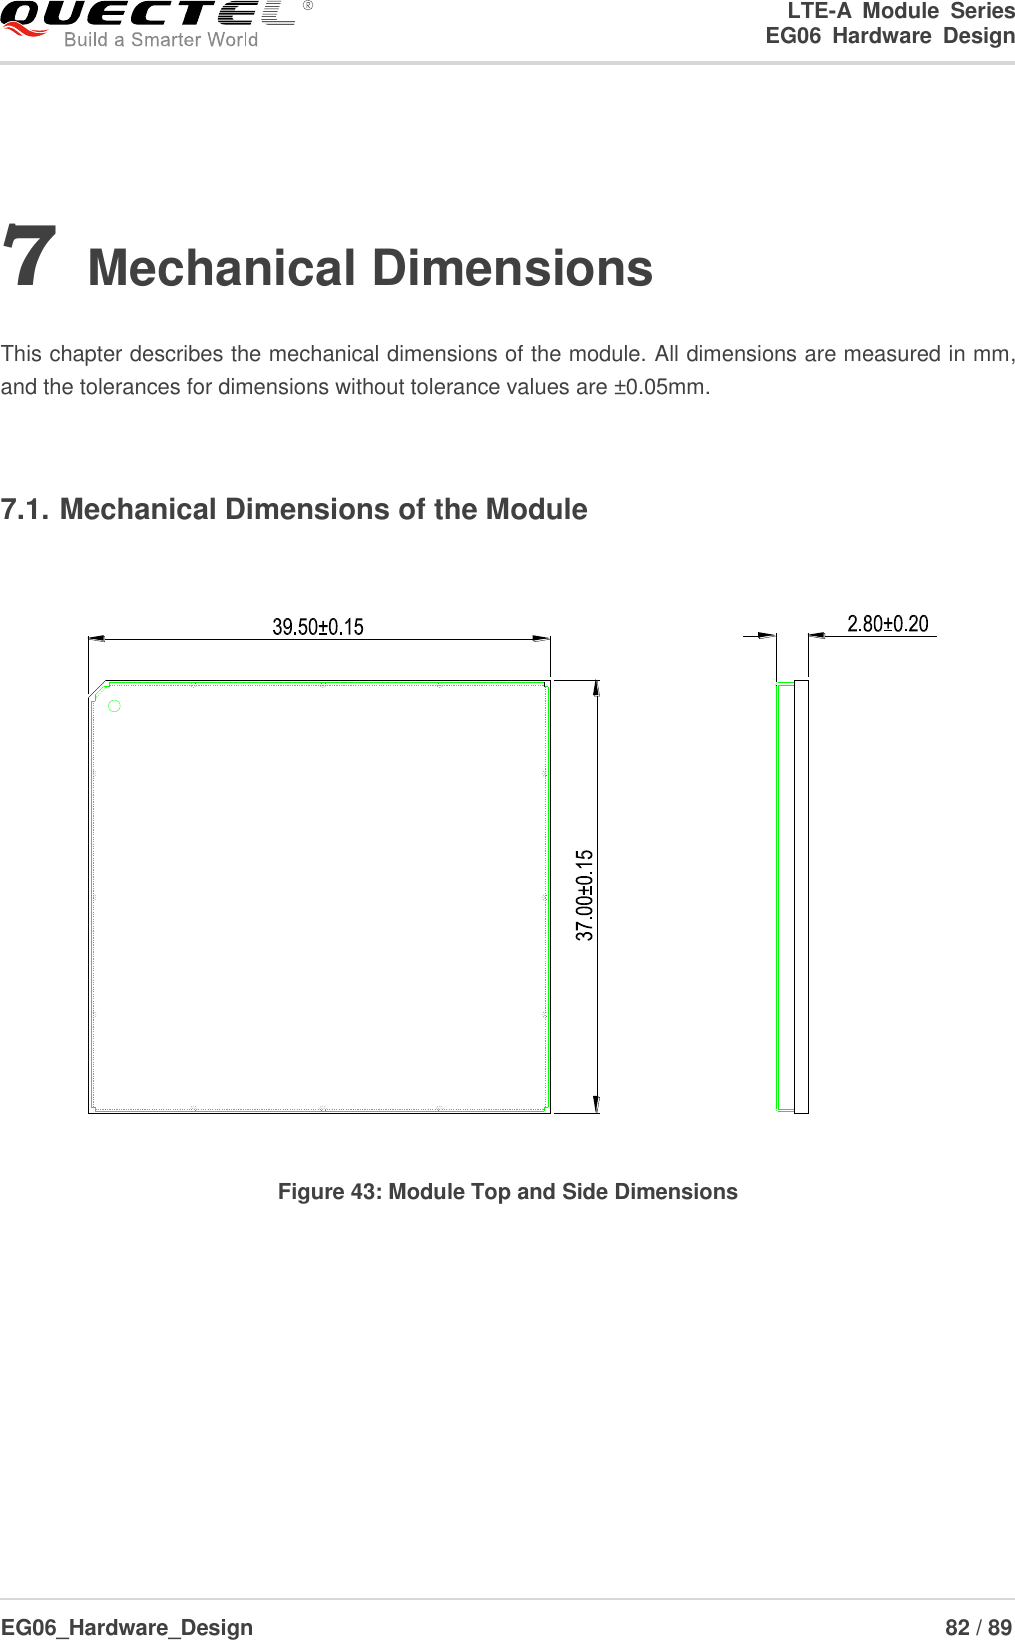 LTE-A  Module  Series                                                  EG06  Hardware  Design  EG06_Hardware_Design                                                               82 / 89    7 Mechanical Dimensions  This chapter describes the mechanical dimensions of the module. All dimensions are measured in mm, and the tolerances for dimensions without tolerance values are ±0.05mm.  7.1. Mechanical Dimensions of the Module  Figure 43: Module Top and Side Dimensions  